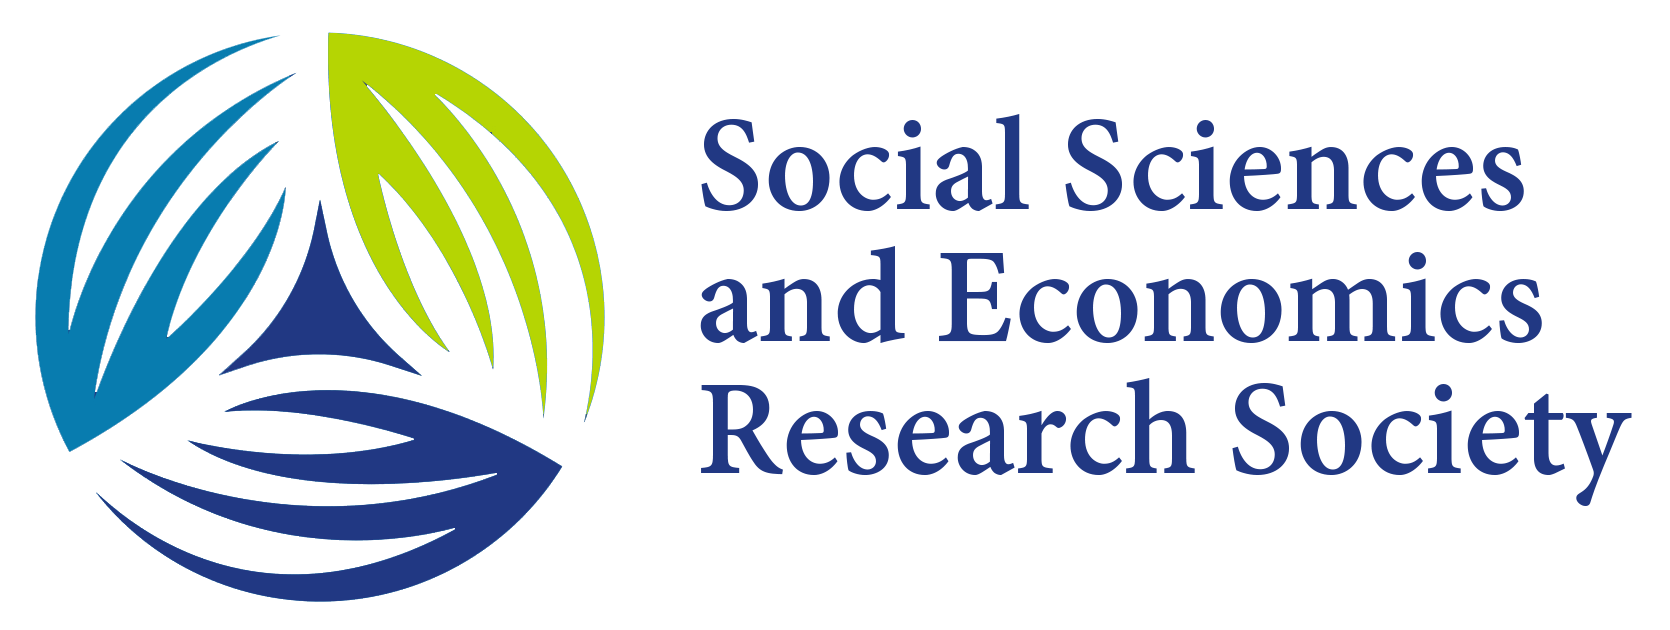 Amsterdam, Netherlands SSERS 2nd International Conference on Performance Indicators in Business, Economics, Management & Social Sciences Research